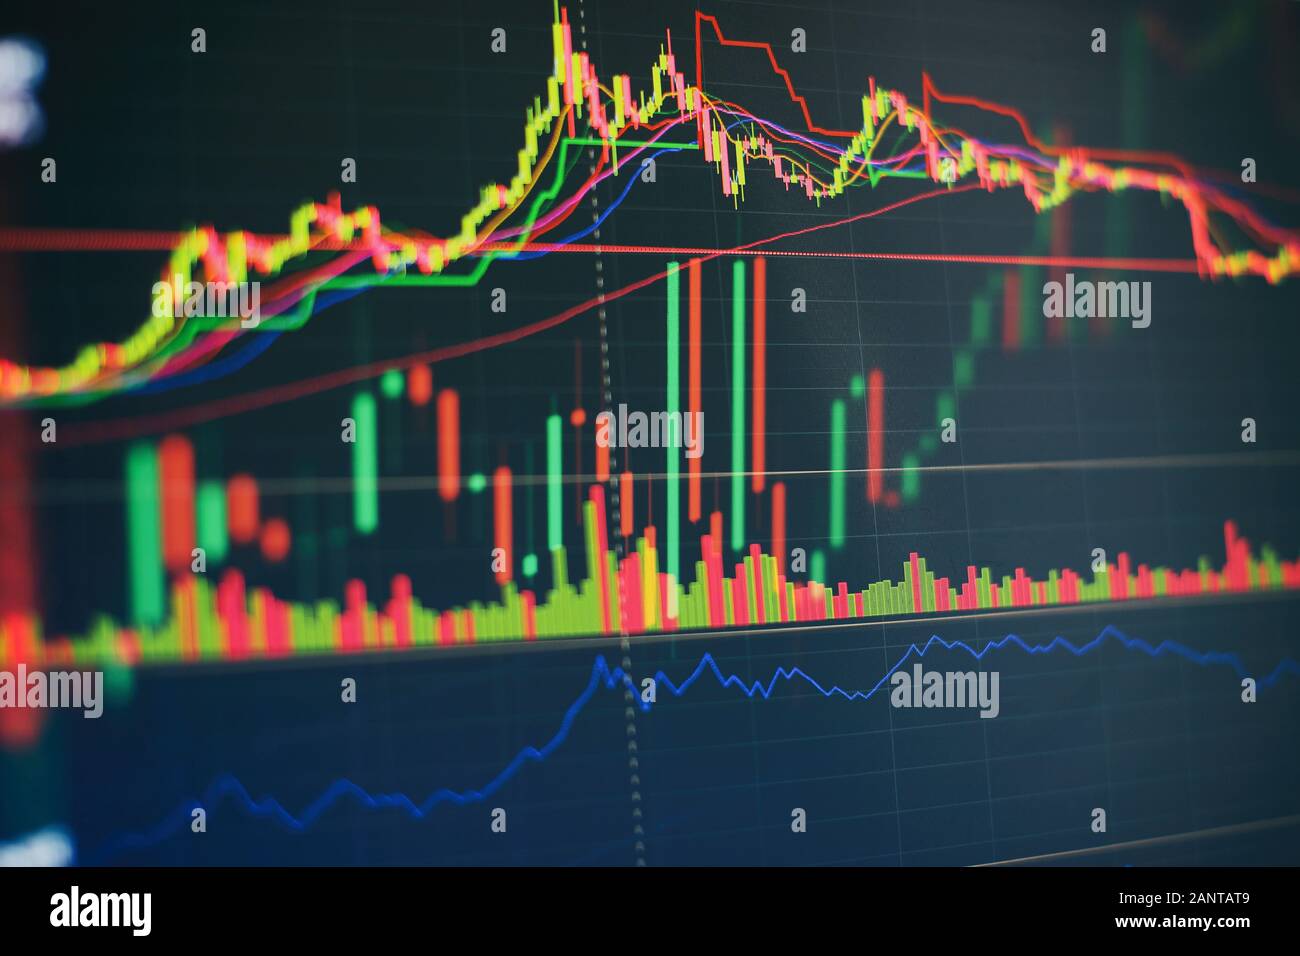 Professional technical analysis on the monitor of a computer. Fundamental and technical analysis concept. Stock trading, crypto currency background. Stock Photo